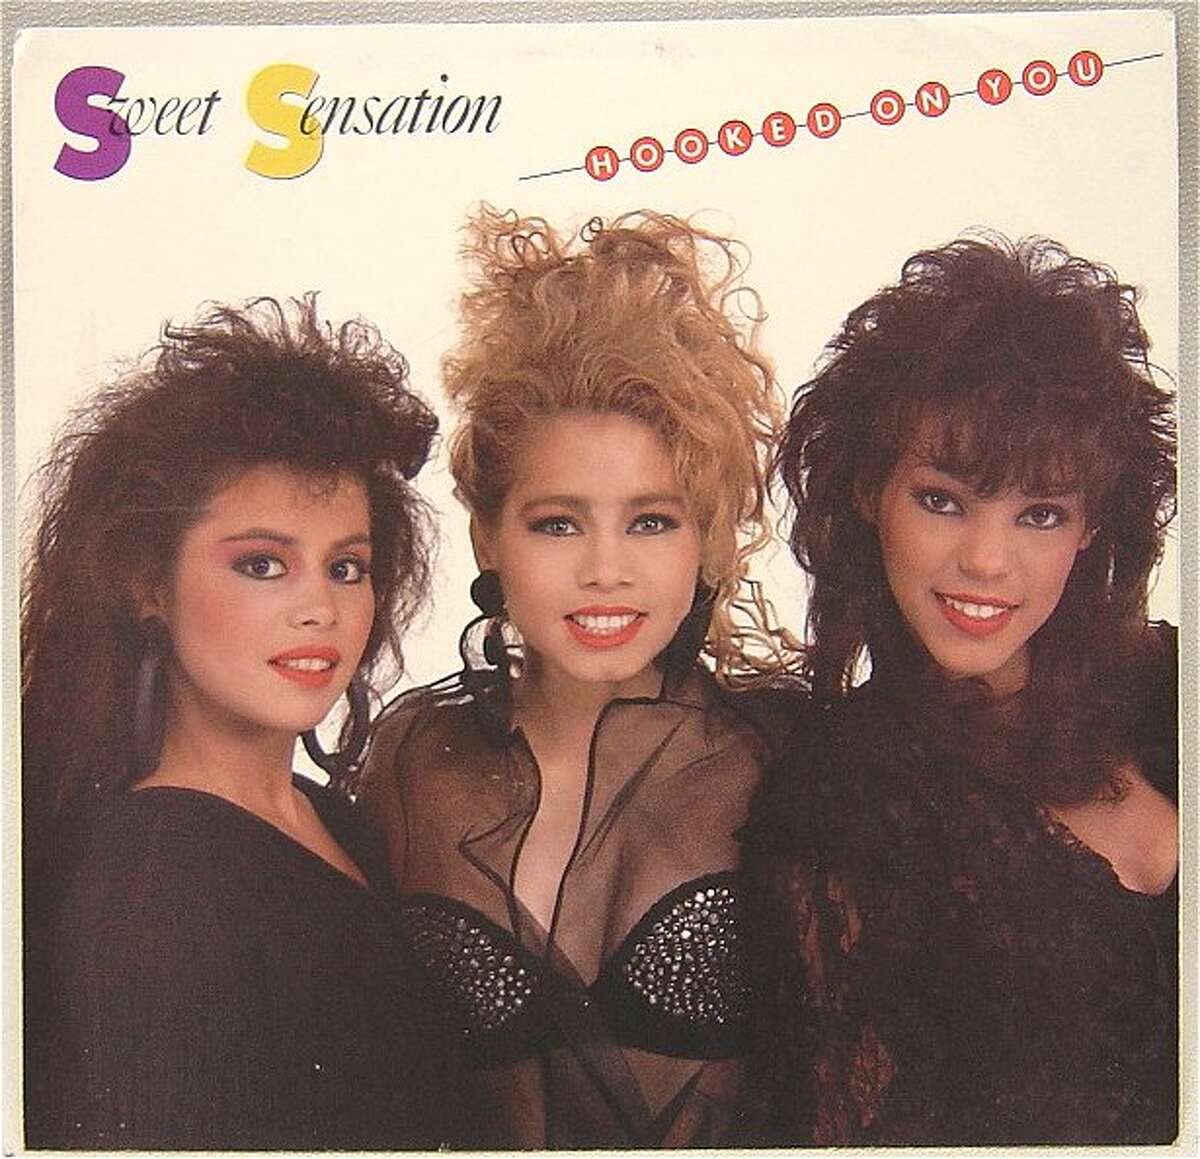 Sweet Sensation: "Hooked On You," "Take it While It's Hot," "Never Let You Go" CLICK THROUGH FOR MORE FREESTYLE ACTS YOU MIGHT REMEMBER.